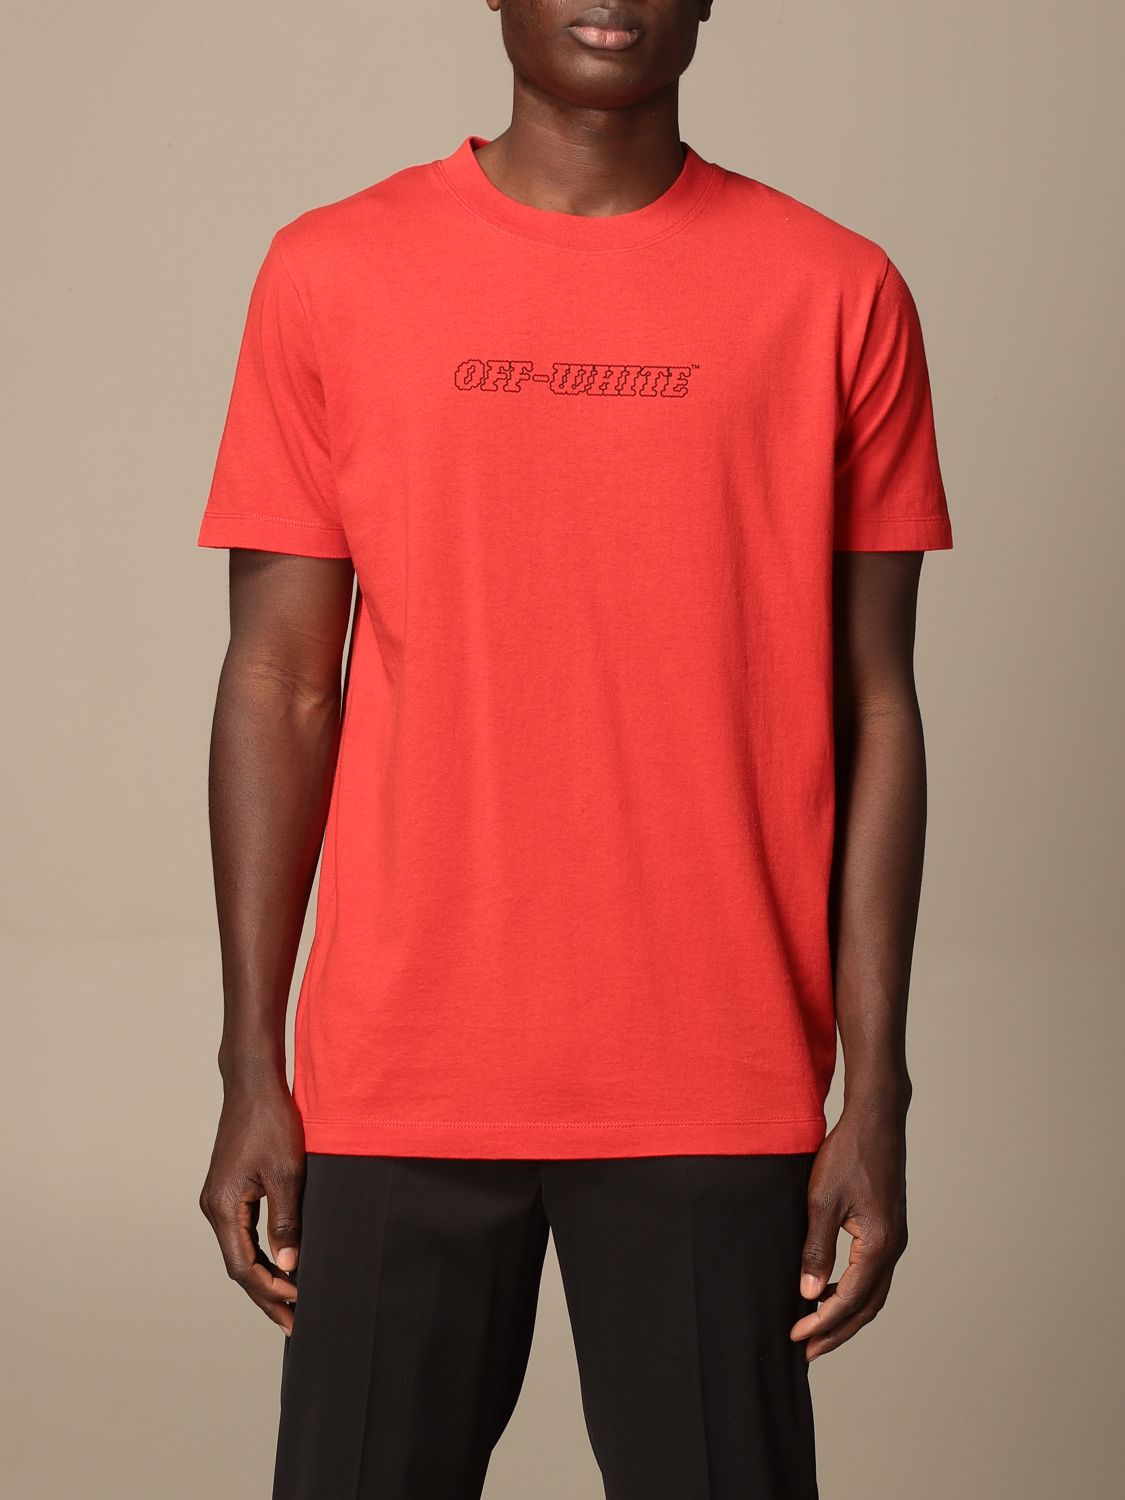 OFF-WHITE: Off White cotton t-shirt with back print Red | Off-White t- shirt OMAA027R21JER011 online GIGLIO.COM